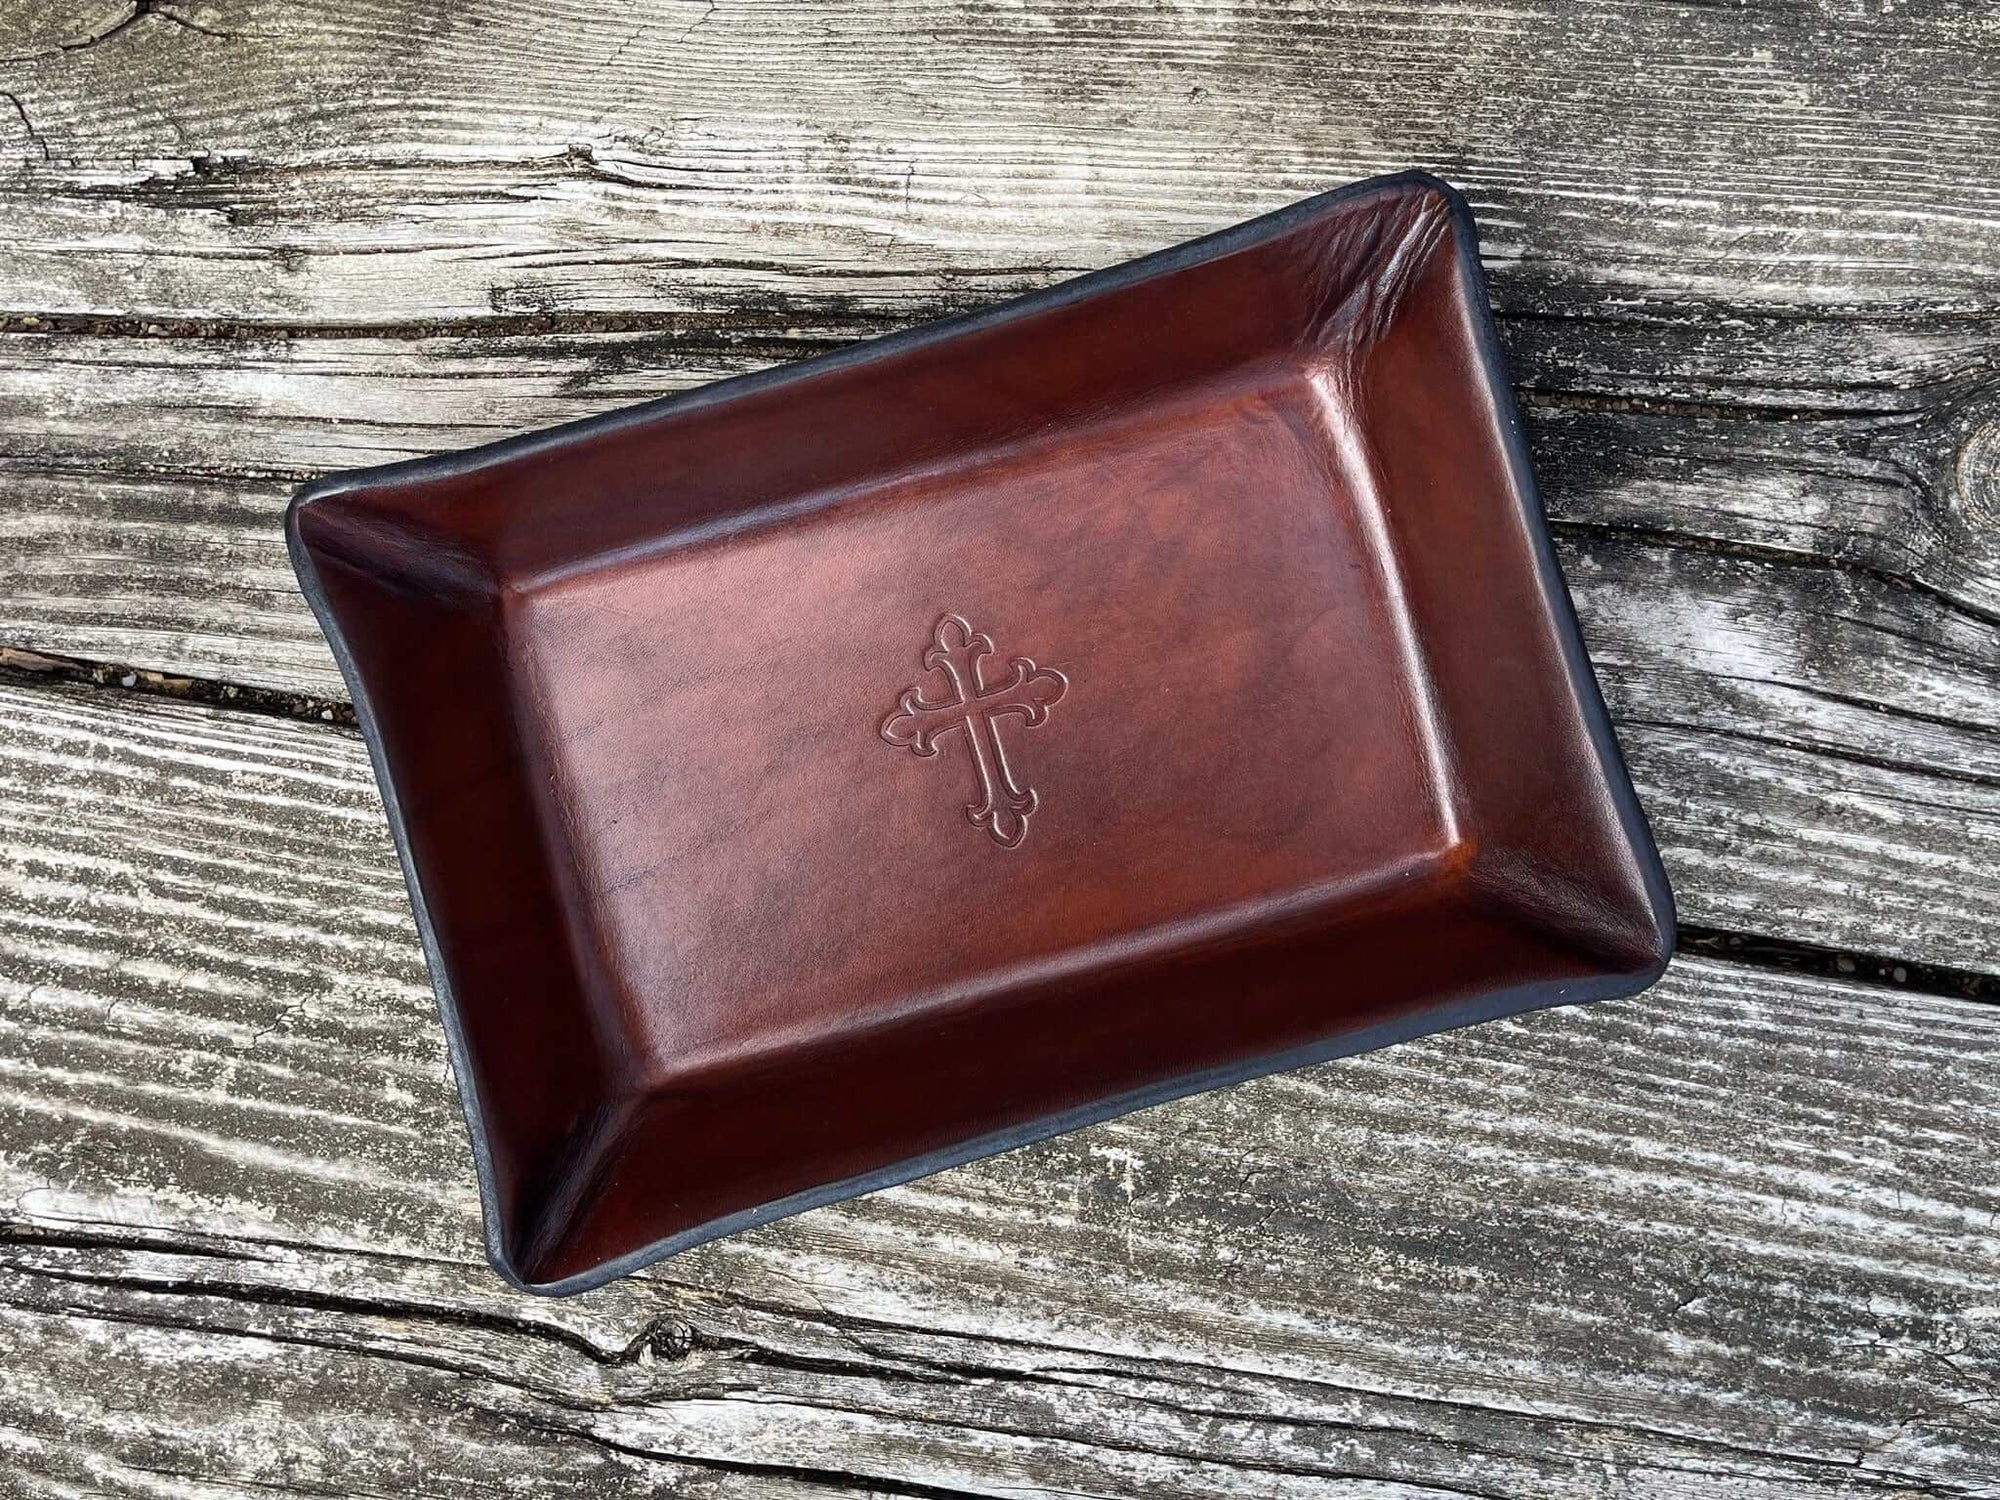 Religious leather valet tray with cross motif. Rectangular